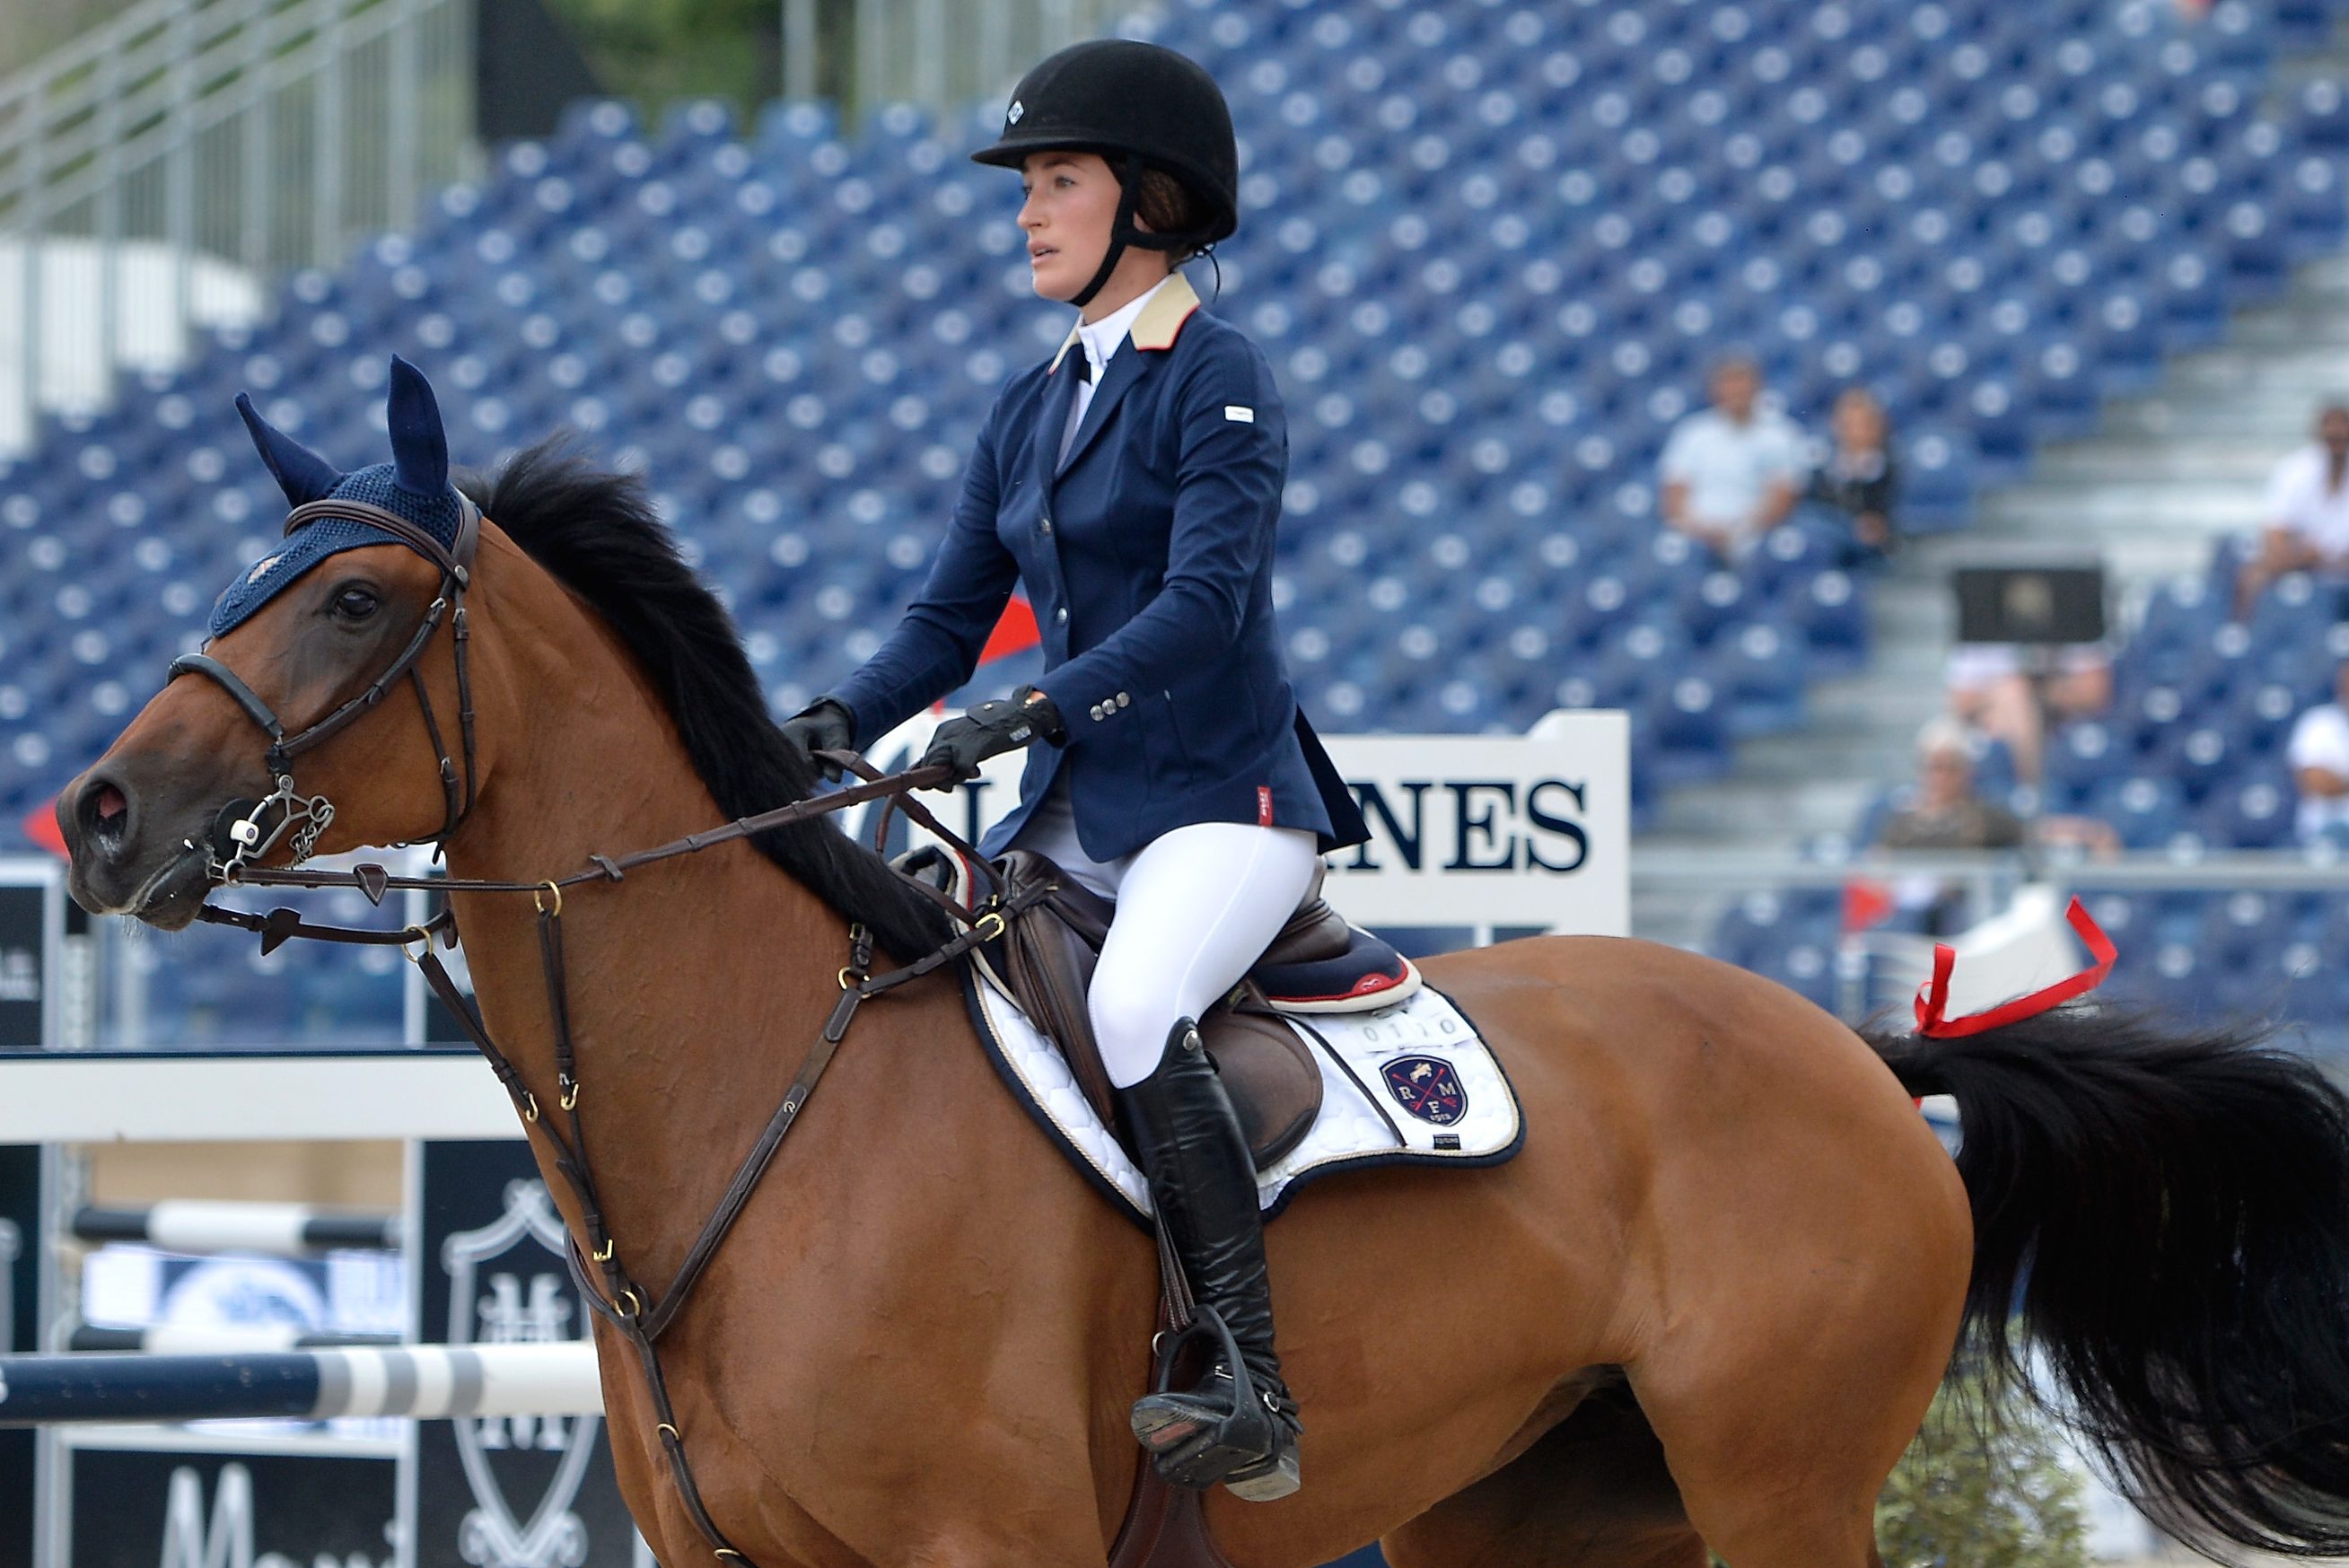 Jessica Springsteen, Bruce Springsteen's daughter, on horseback at the 5th Longines Paris Eiffel Jumping in 2018 in Paris